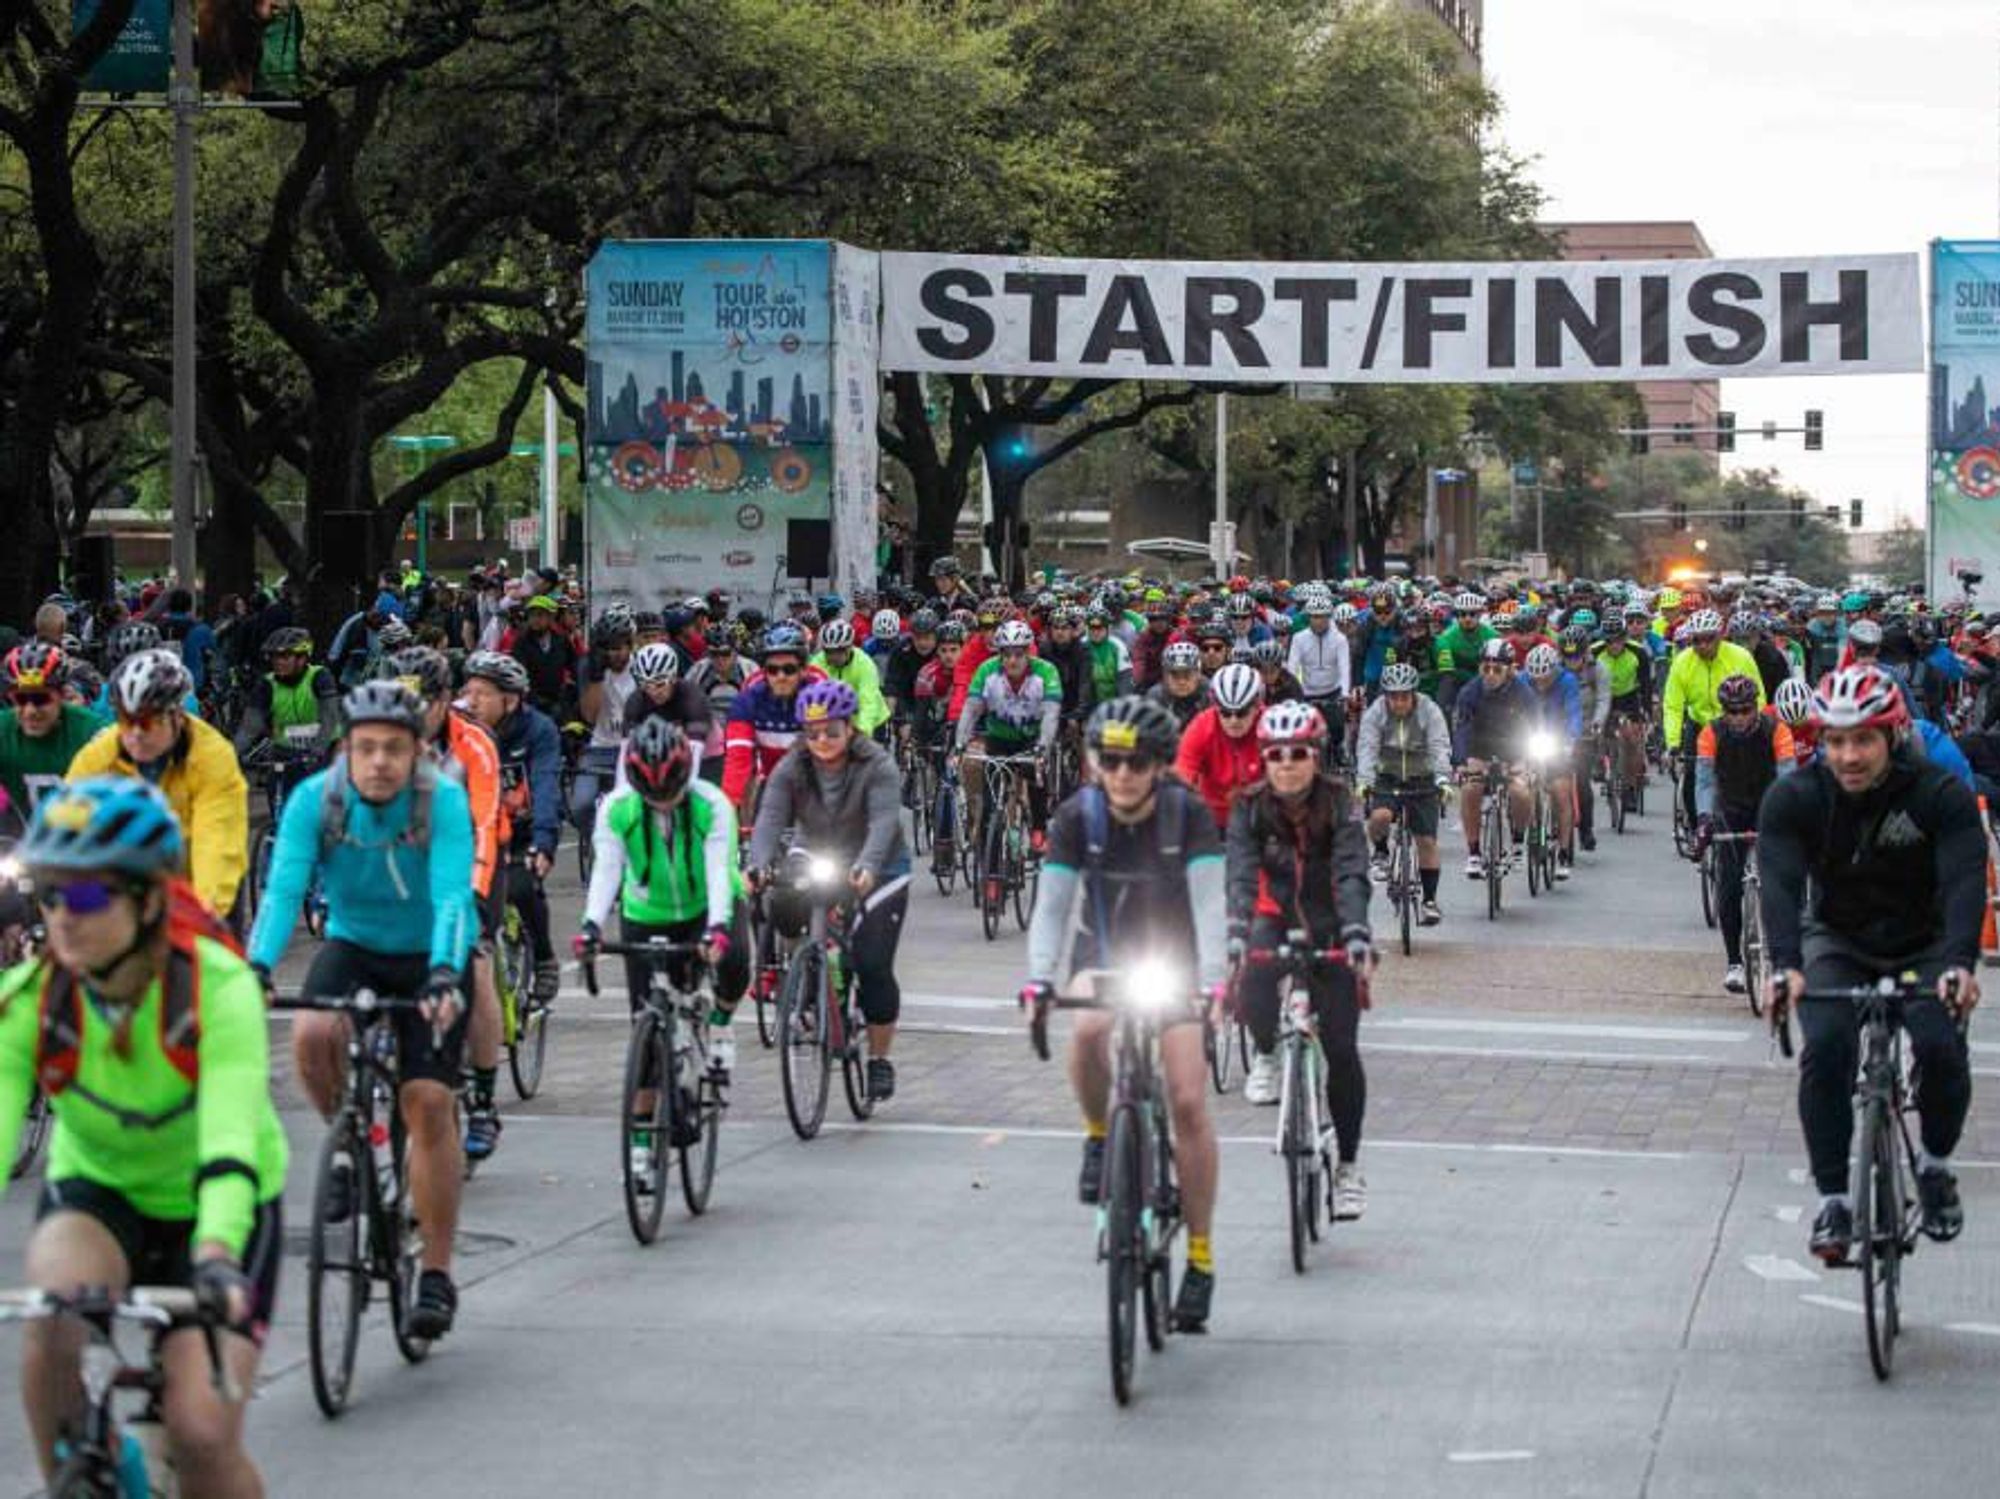 Tour de Houston annual bike ride cyclists back with scenic